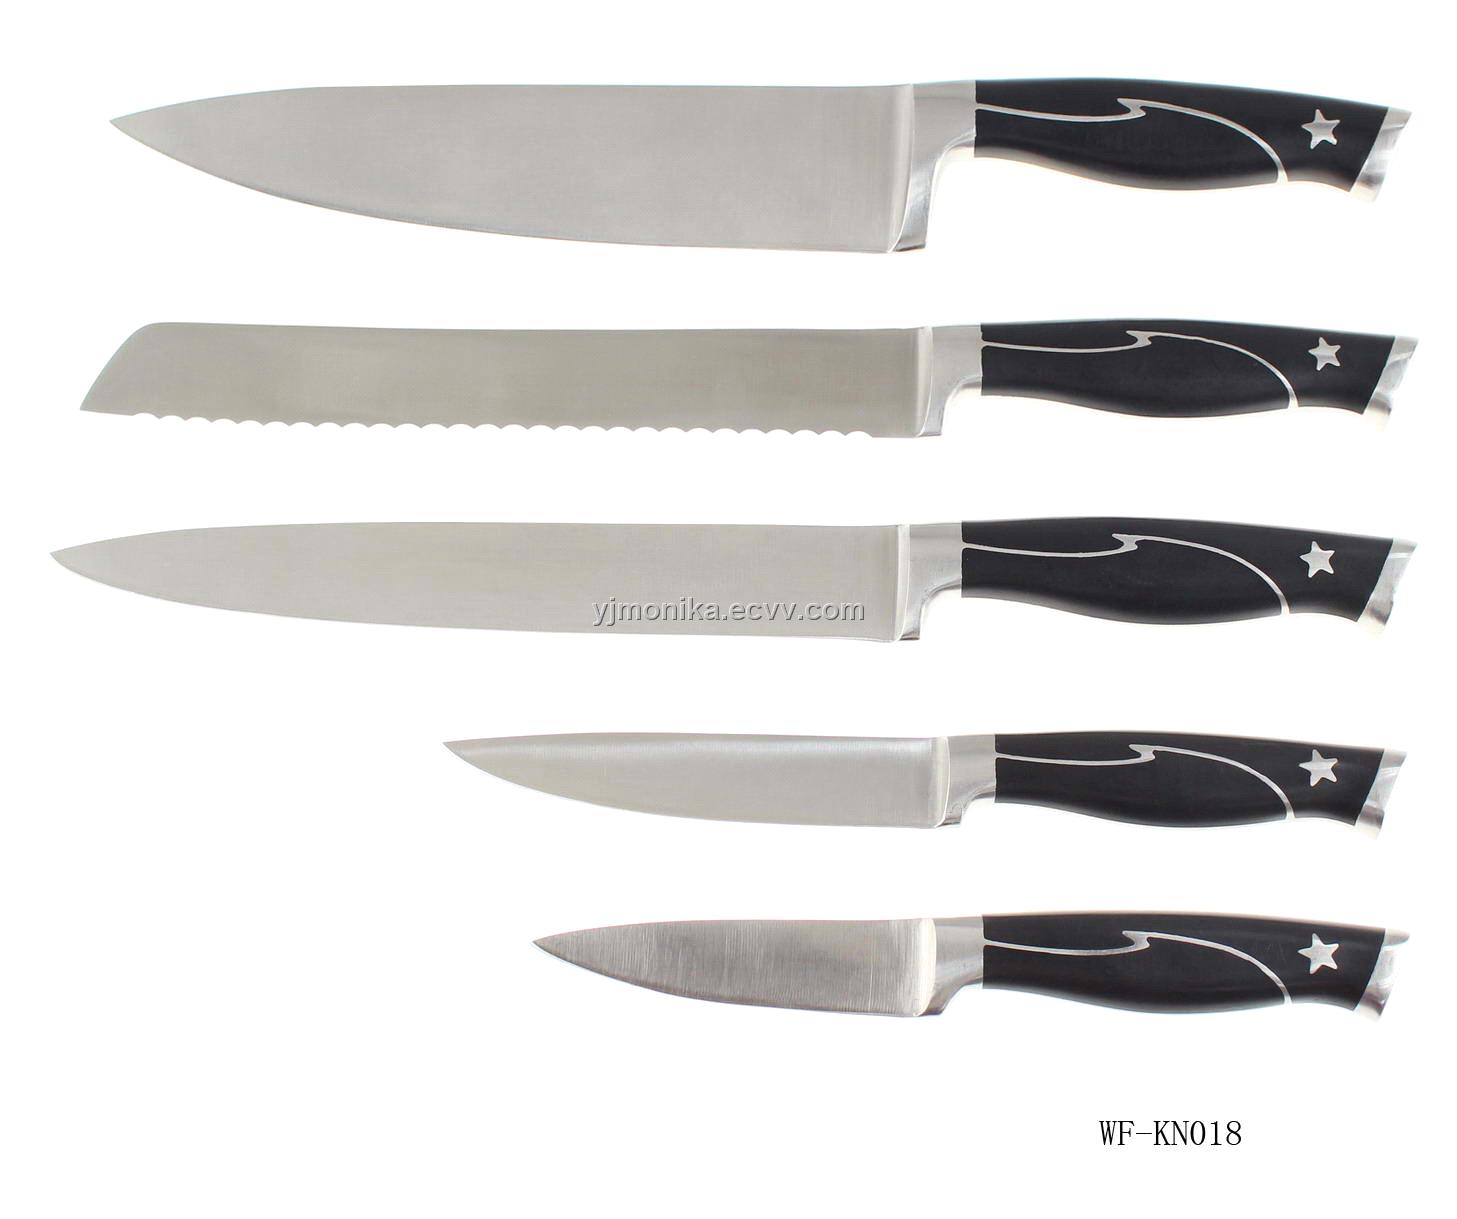 ABS handle stainless steel kitchen knife set WF-KN018